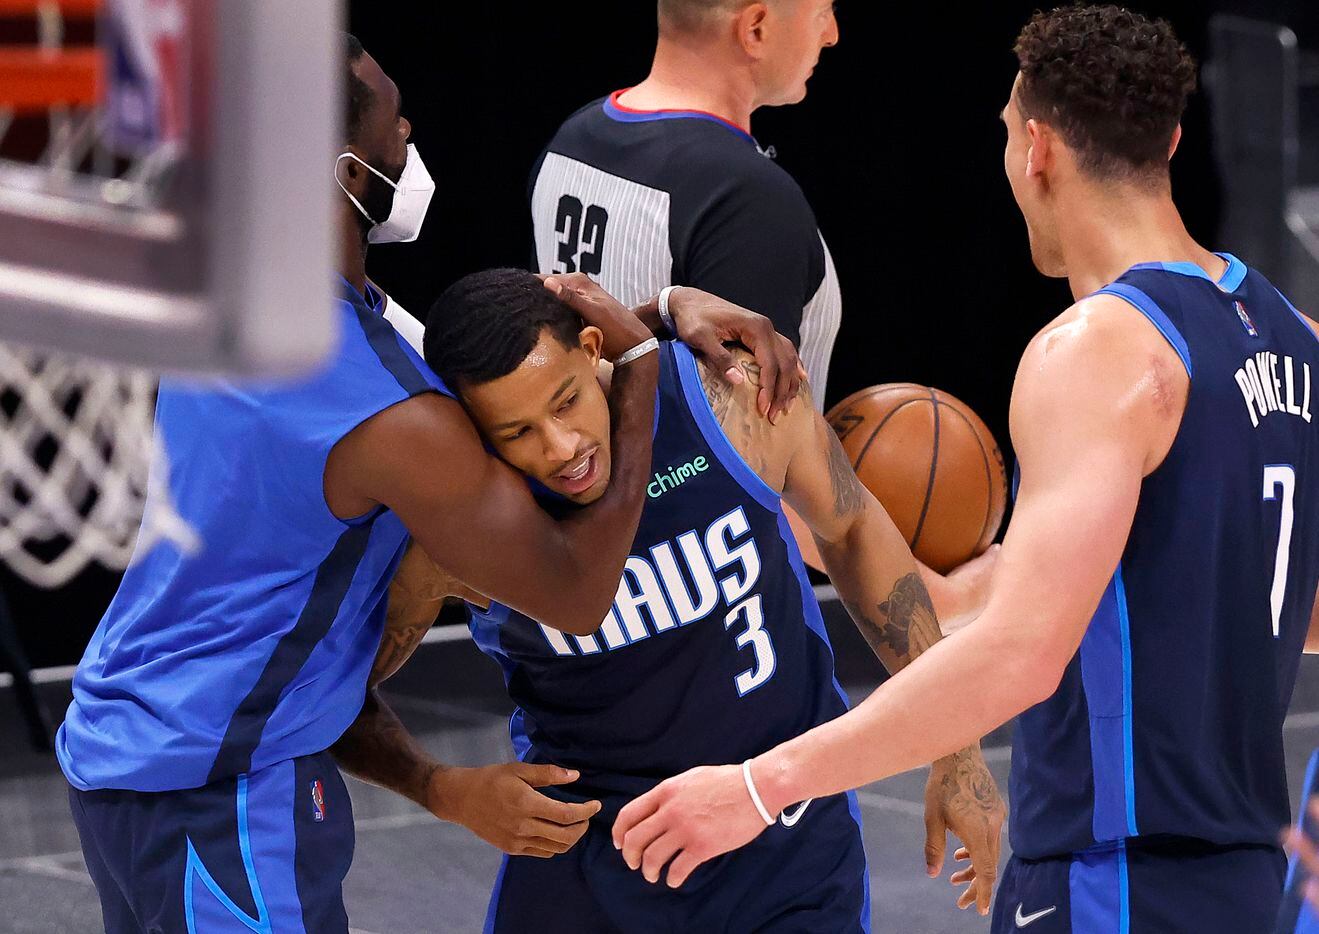 Dallas Mavericks guard Trey Burke (3) is congratulated by teammates after hitting a last second three-pointer to end the first quarter Cleveland Cavaliers at the American Airlines Center in Dallas, Friday, May 7, 2021. (Tom Fox/The Dallas Morning News)